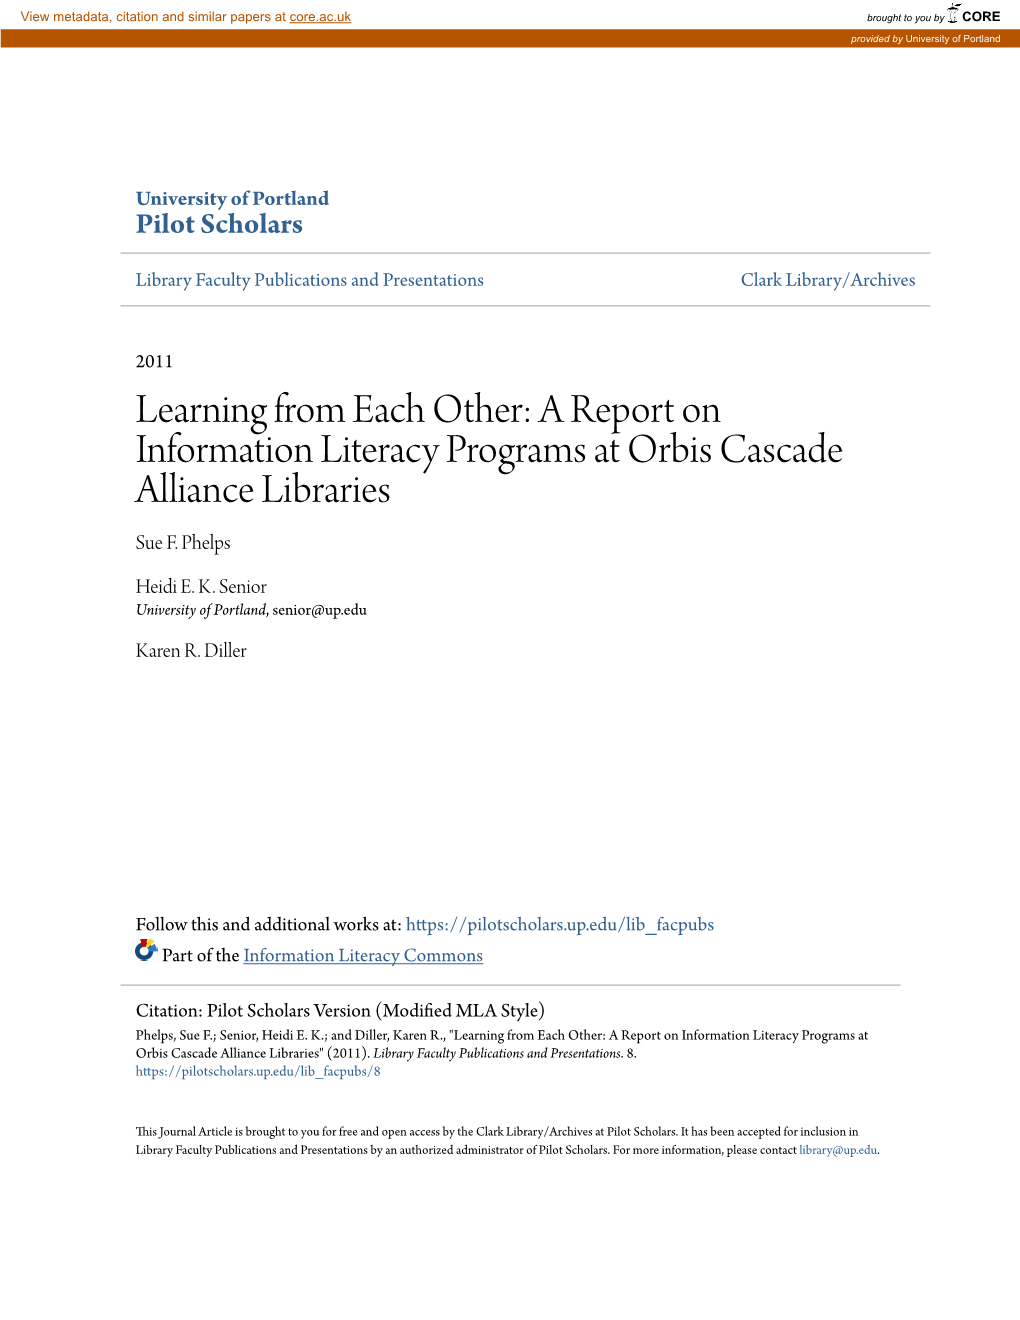 A Report on Information Literacy Programs at Orbis Cascade Alliance Libraries Sue F